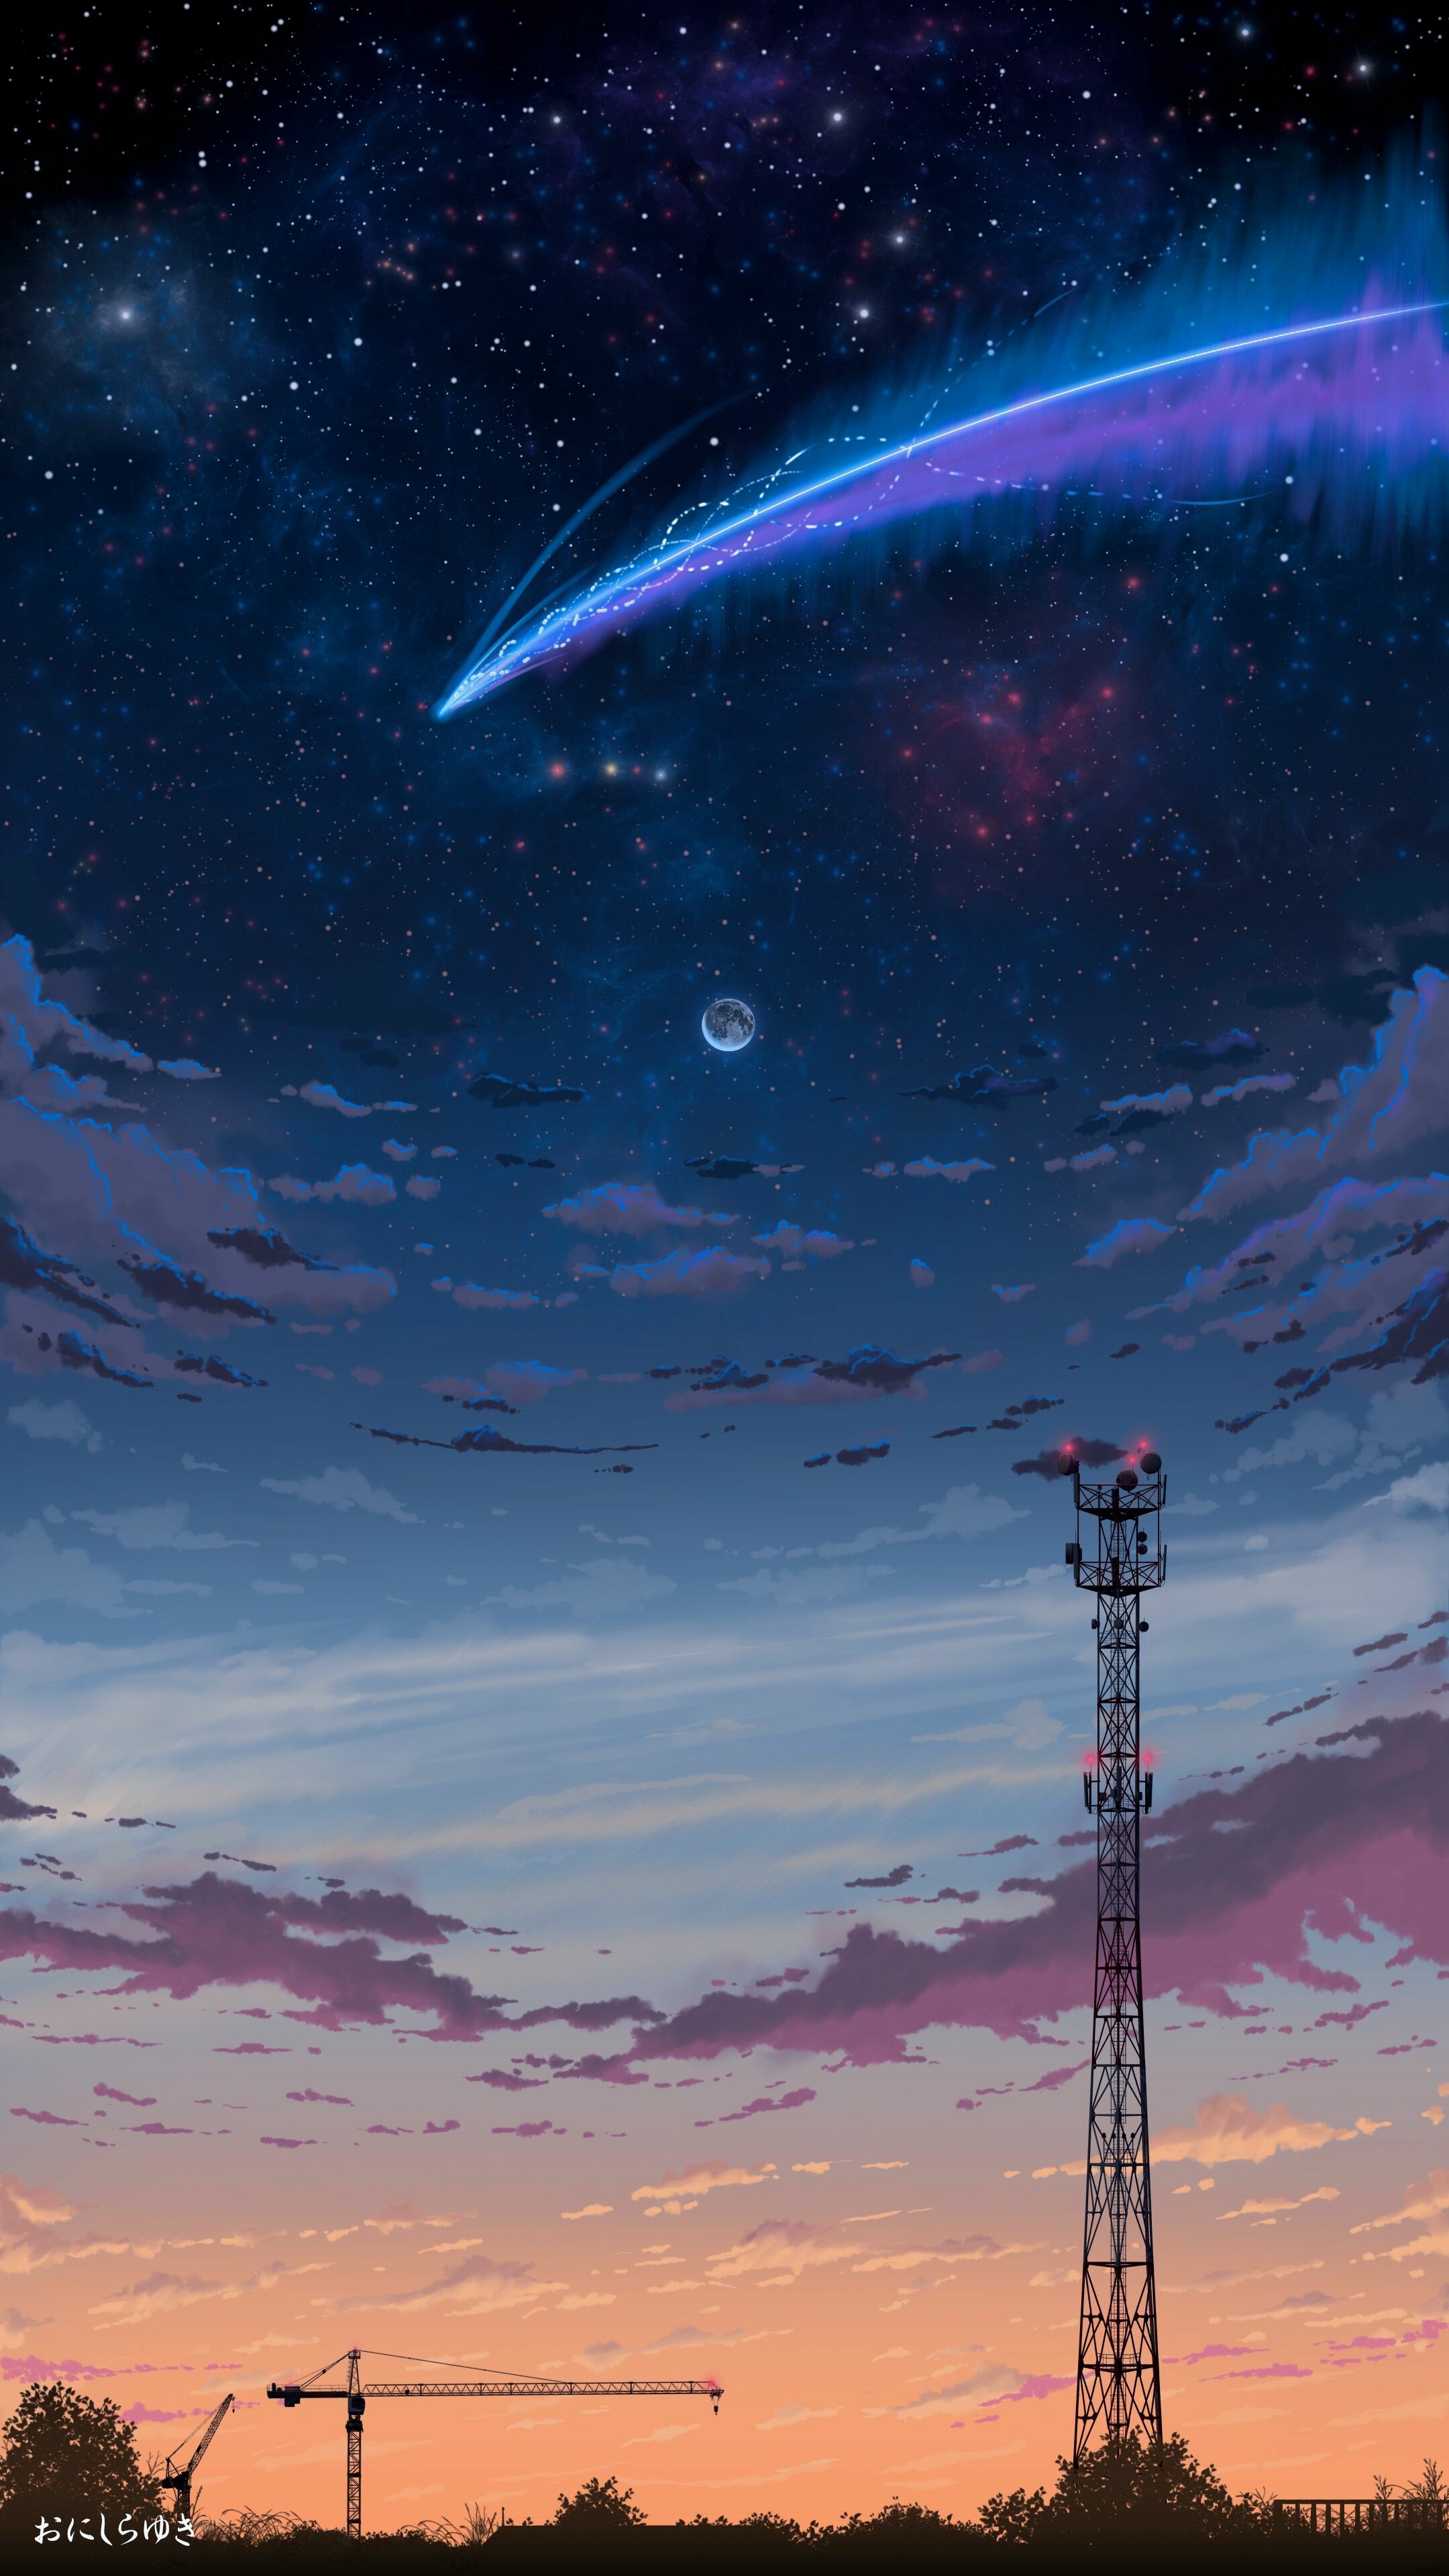 Comet: Aesthetic anime sky, Outgassing, Astronomical object, Cosmos. 2160x3840 4K Background.